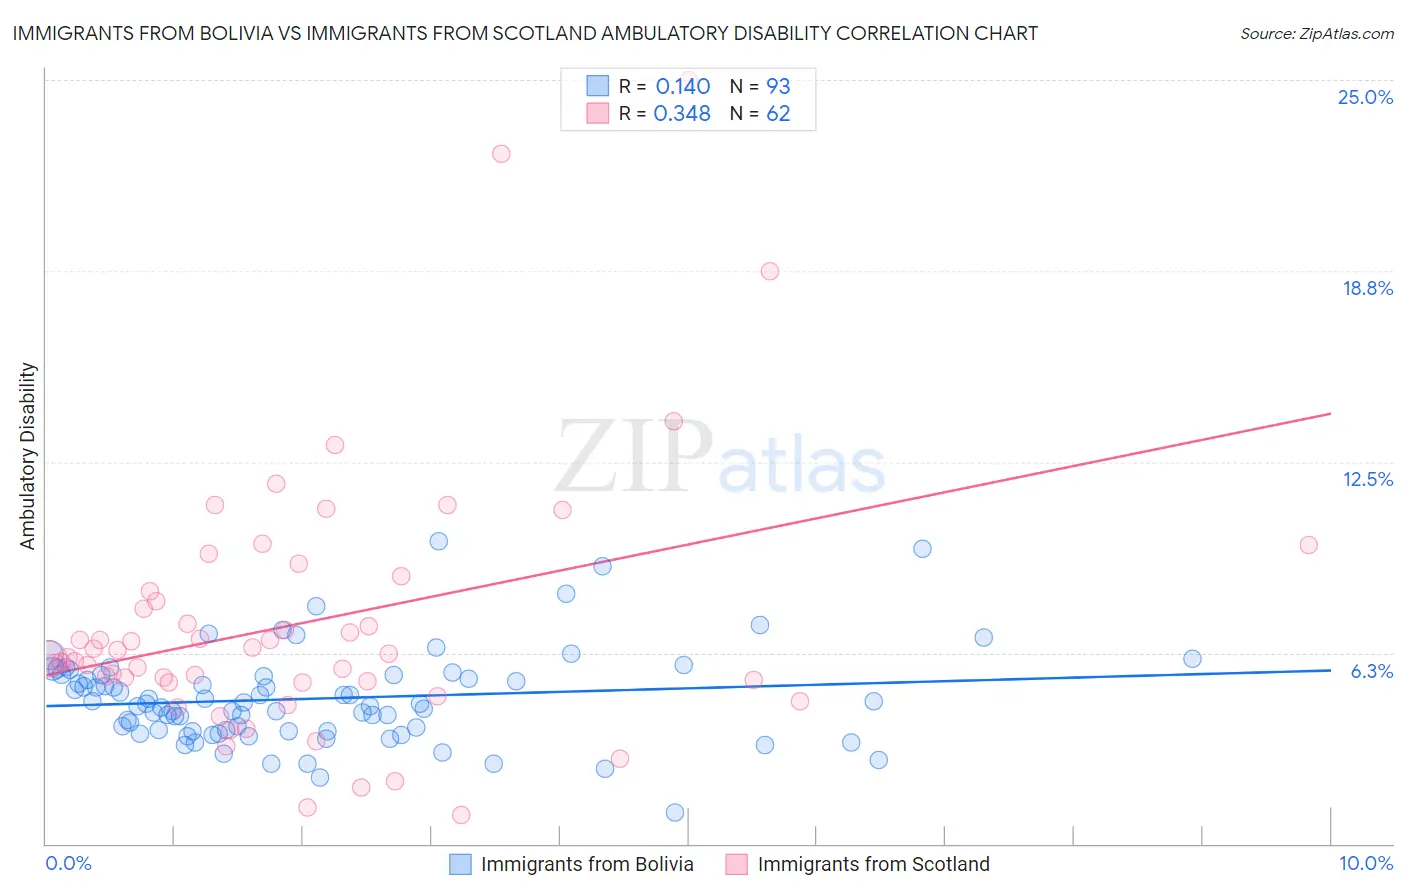 Immigrants from Bolivia vs Immigrants from Scotland Ambulatory Disability